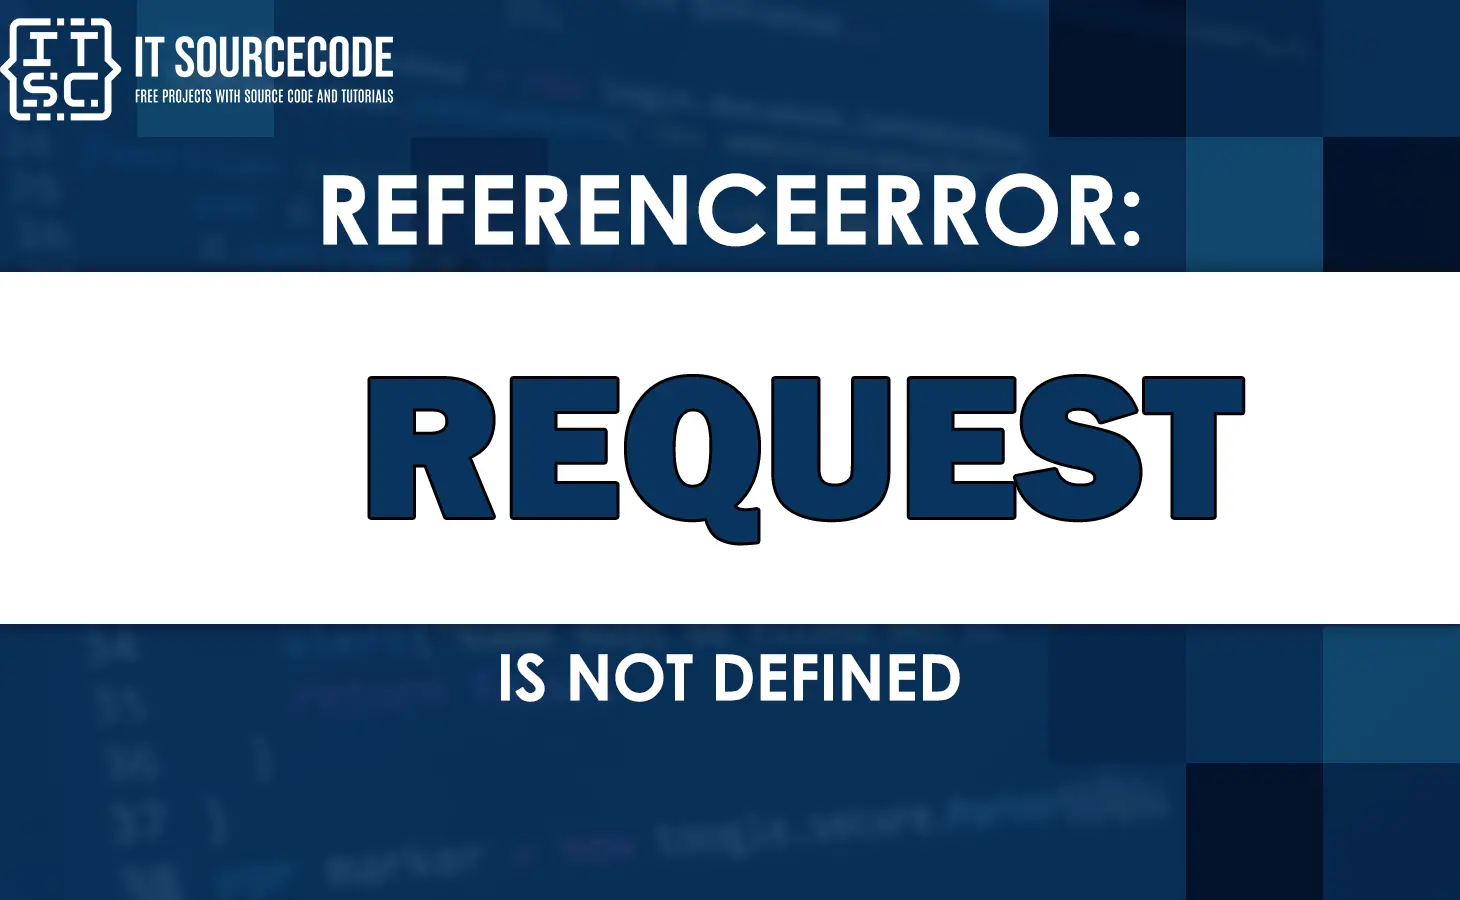 Referenceerror request is not defined